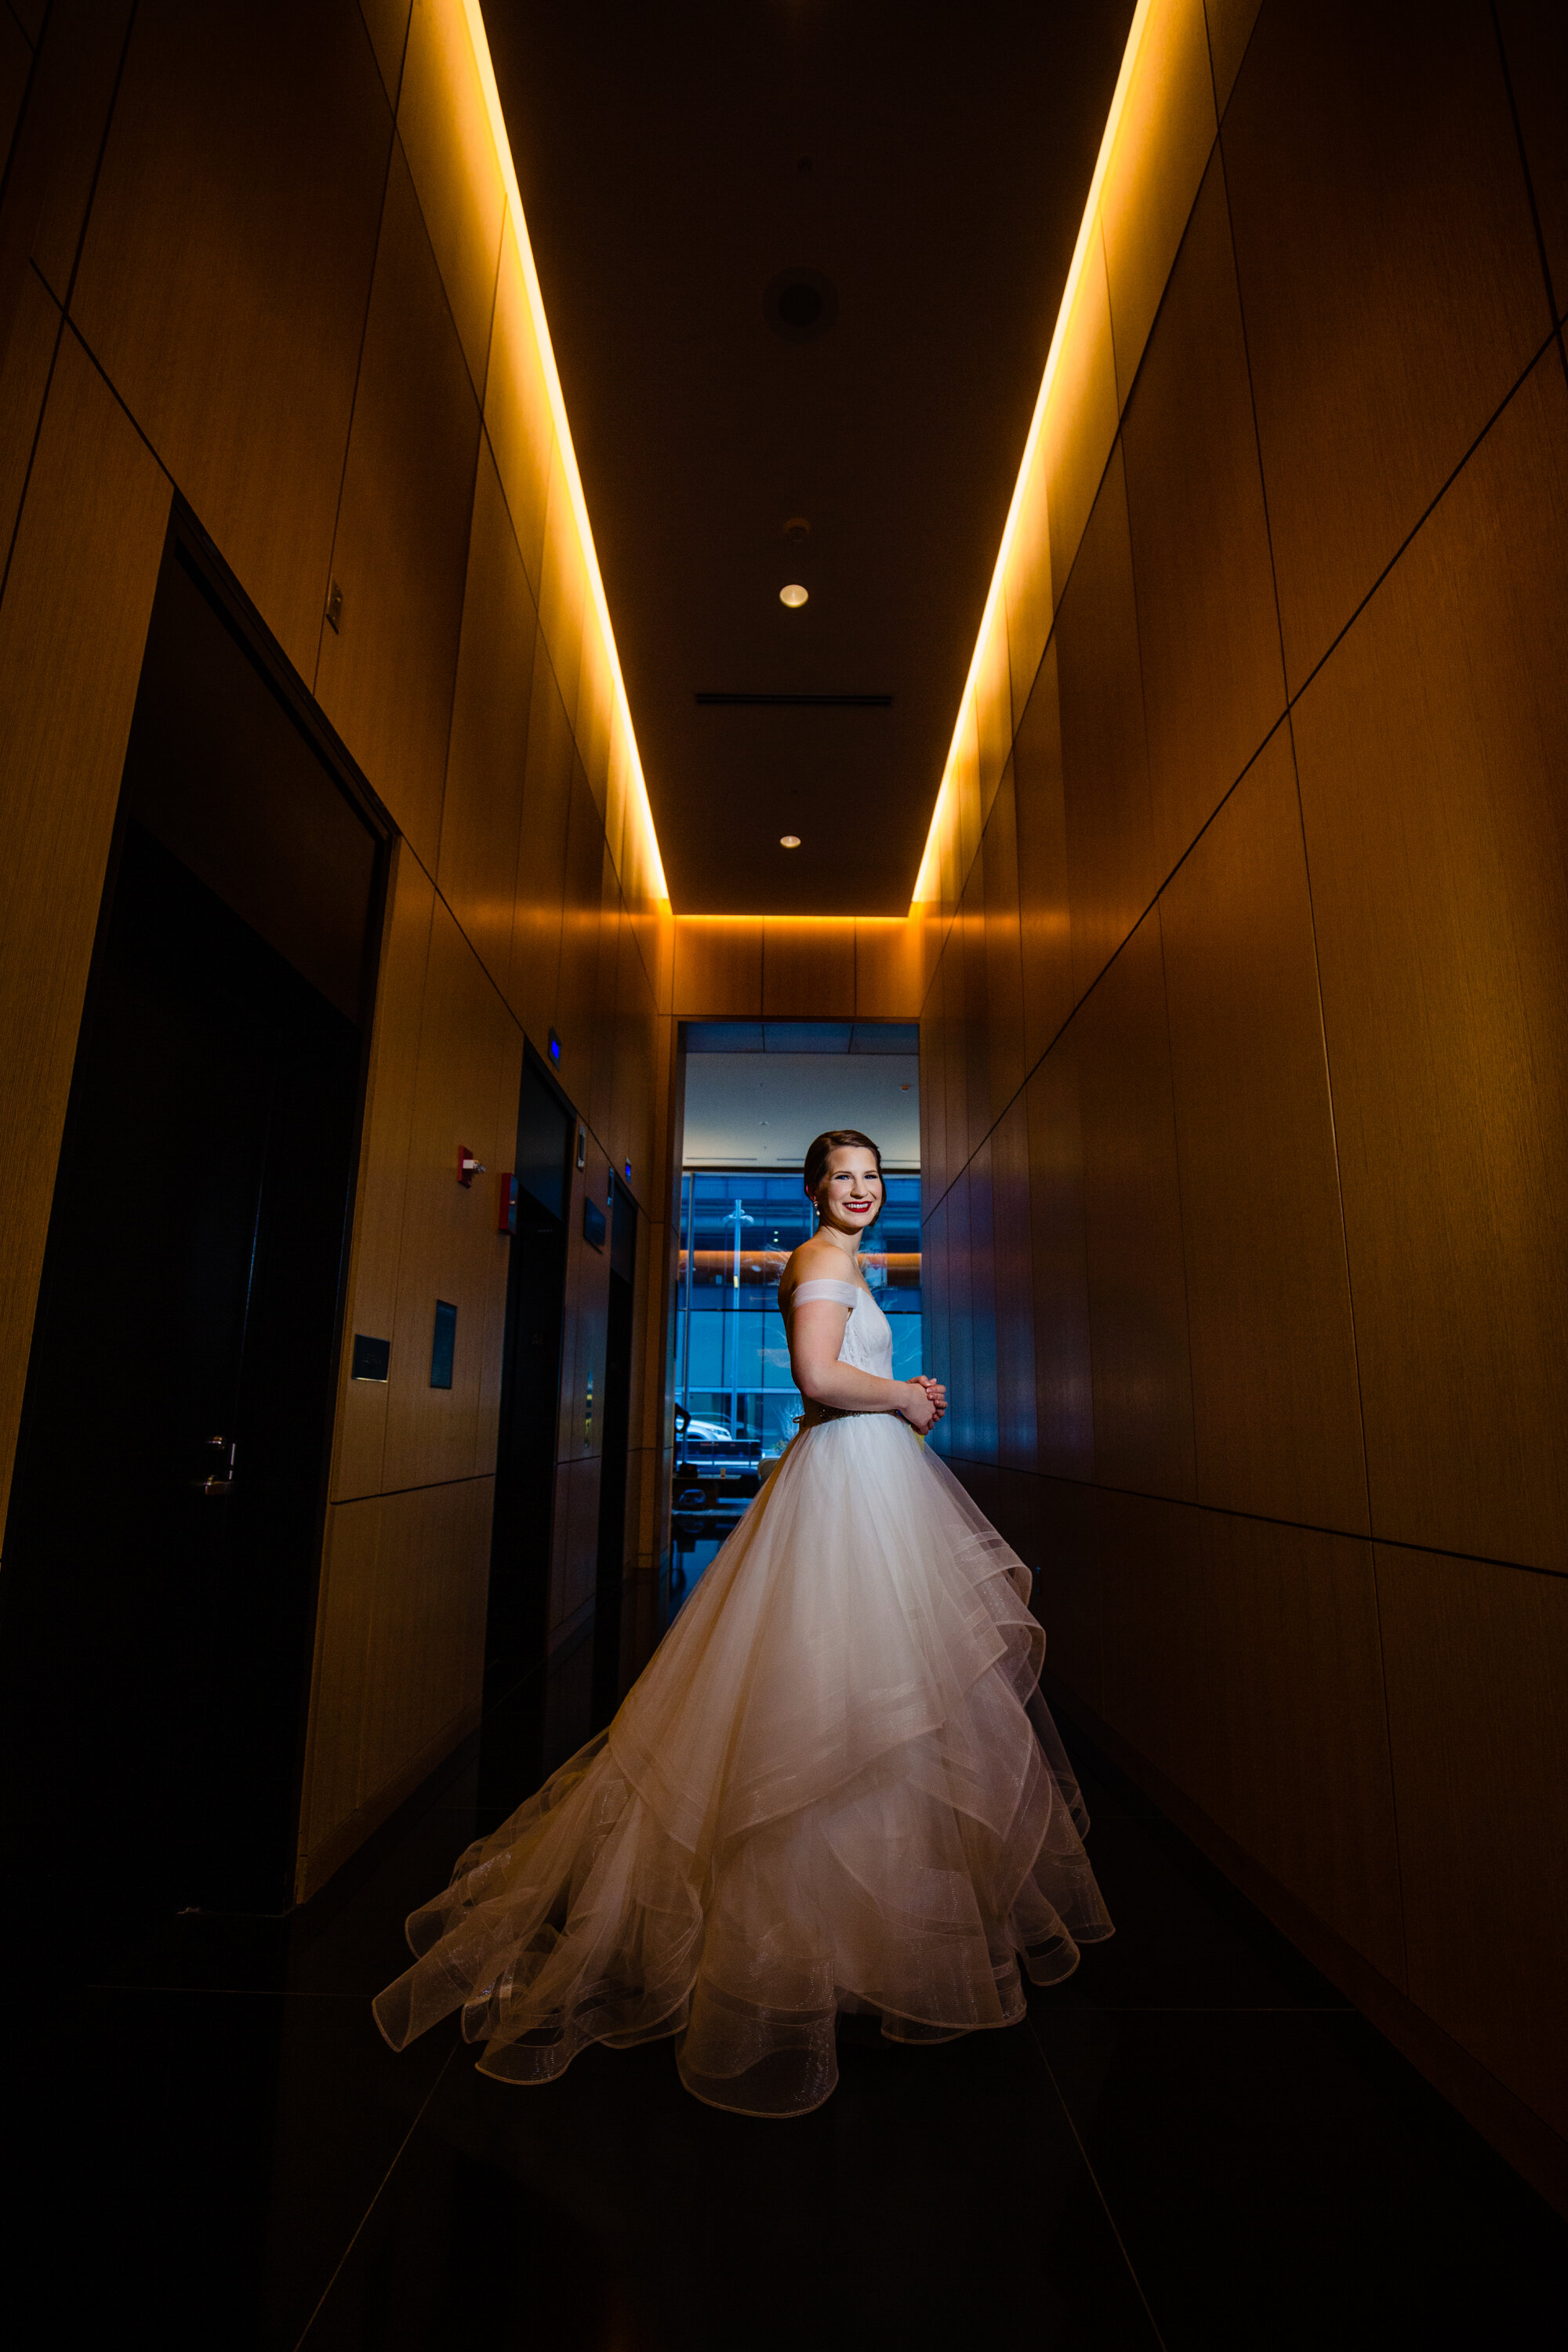 Dramatic and Moody Winter Wedding captured by Juancho SC Photography